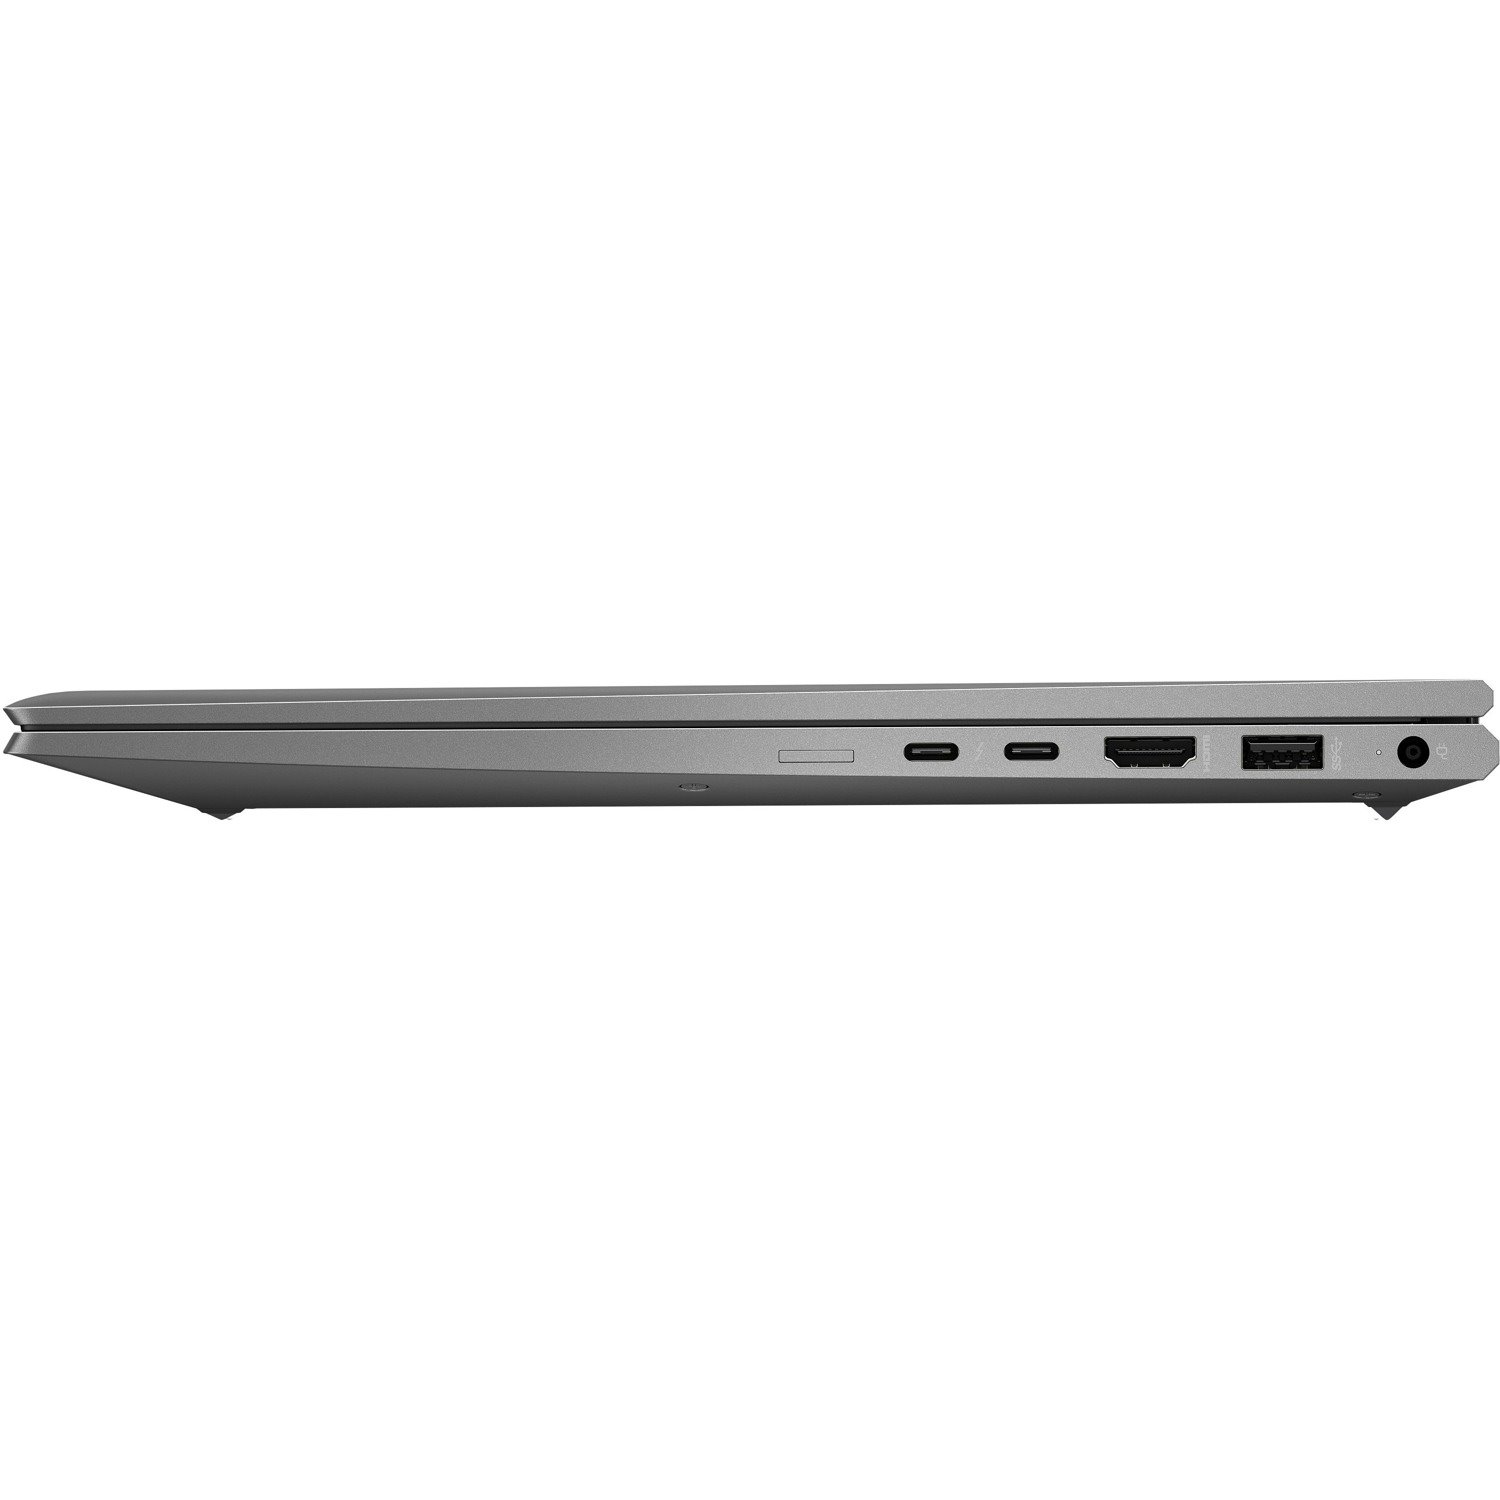 HP ZBook Firefly G8 15.6" Mobile Workstation - Full HD - 1920 x 1080 - Intel Core i7 11th Gen i7-1165G7 Quad-core (4 Core) 2.80 GHz - 16 GB Total RAM - 512 GB SSD